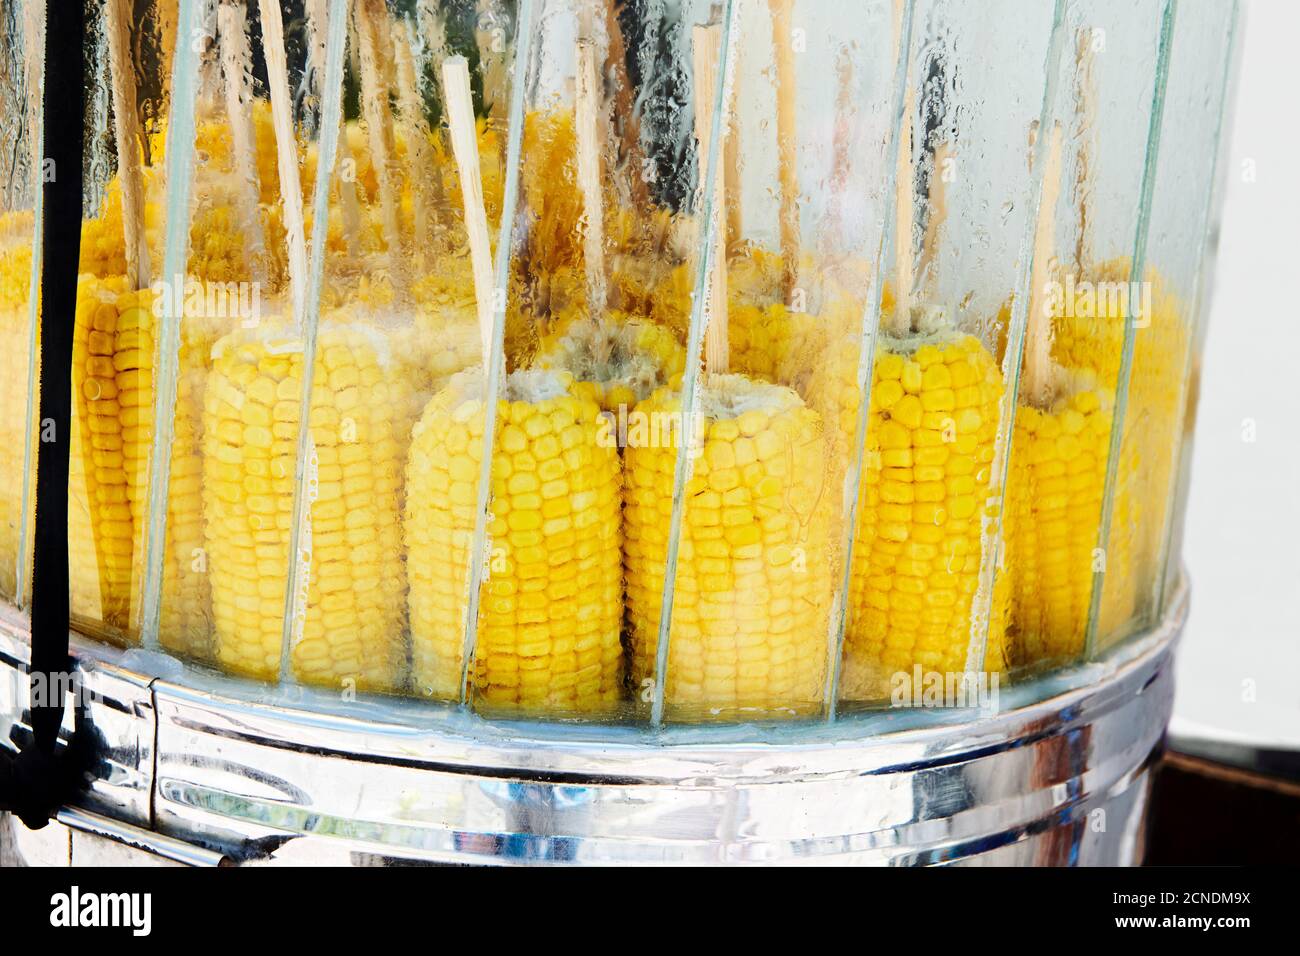 Isolated view of steamed golden colored corn on a stick for sale by a vendor in the Philippines. The yellow corn is kept behind glass for freshness. Stock Photo